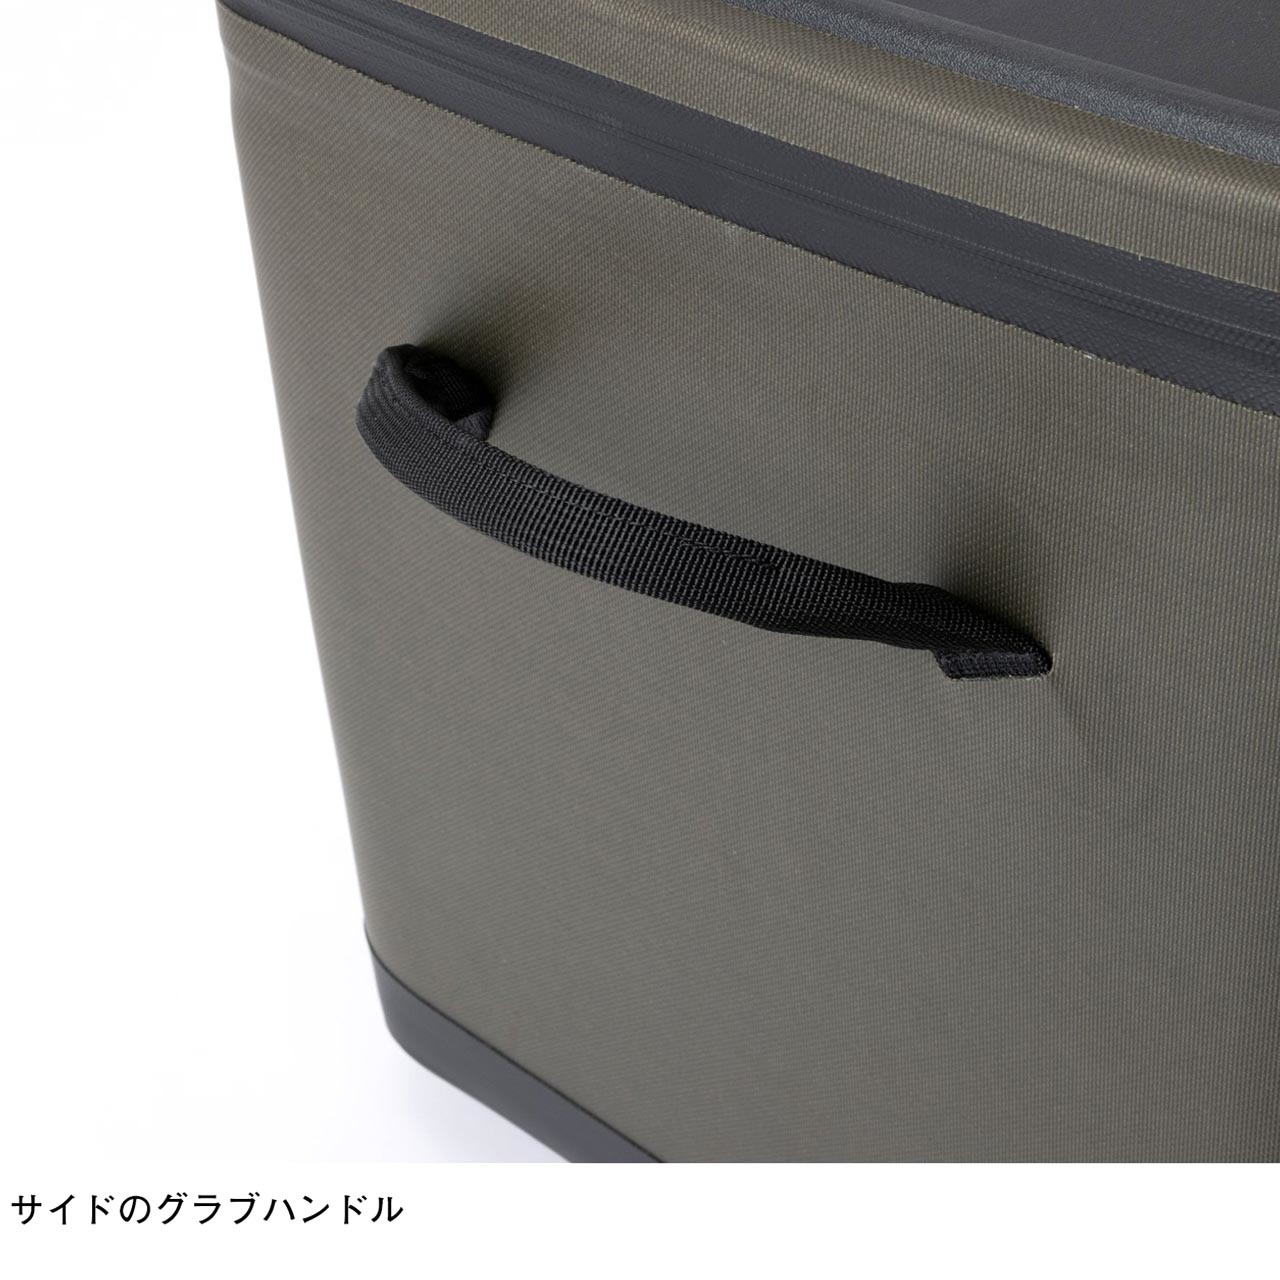 THE NORTH FACE [ザ・ノース・フェイス] Fieludens Gear Container [NM82235]_f0051306_06005859.jpg